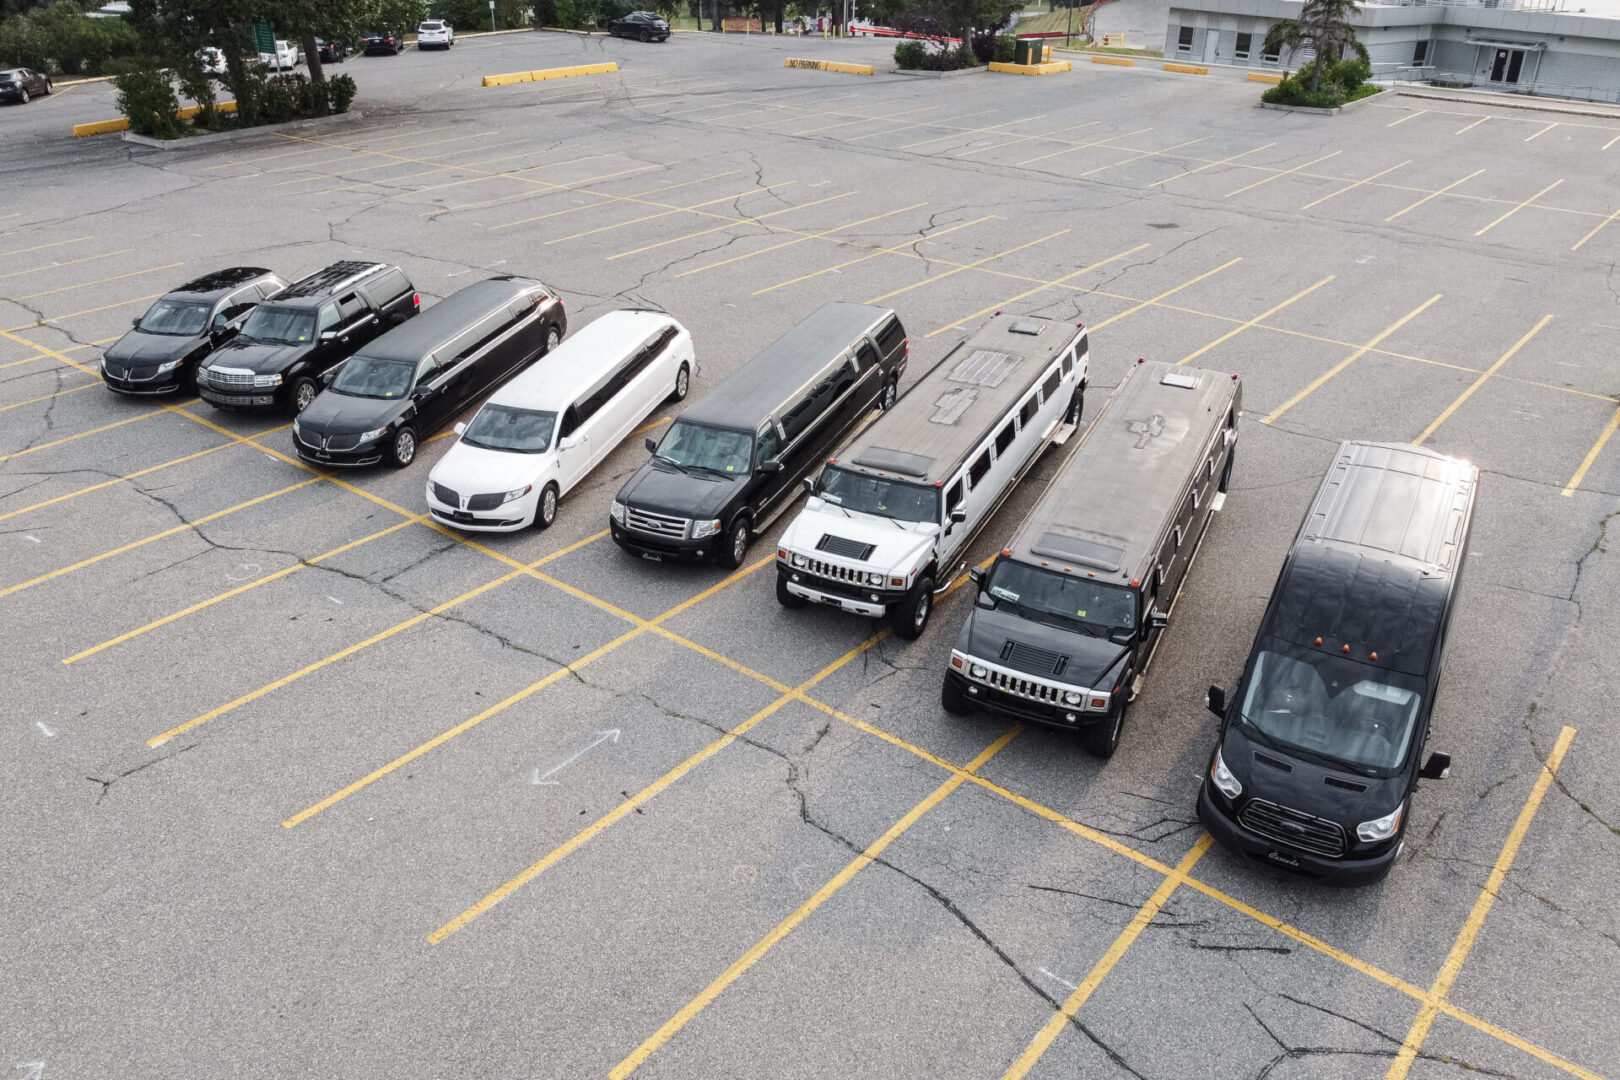 A parking lot with many vehicles parked in it